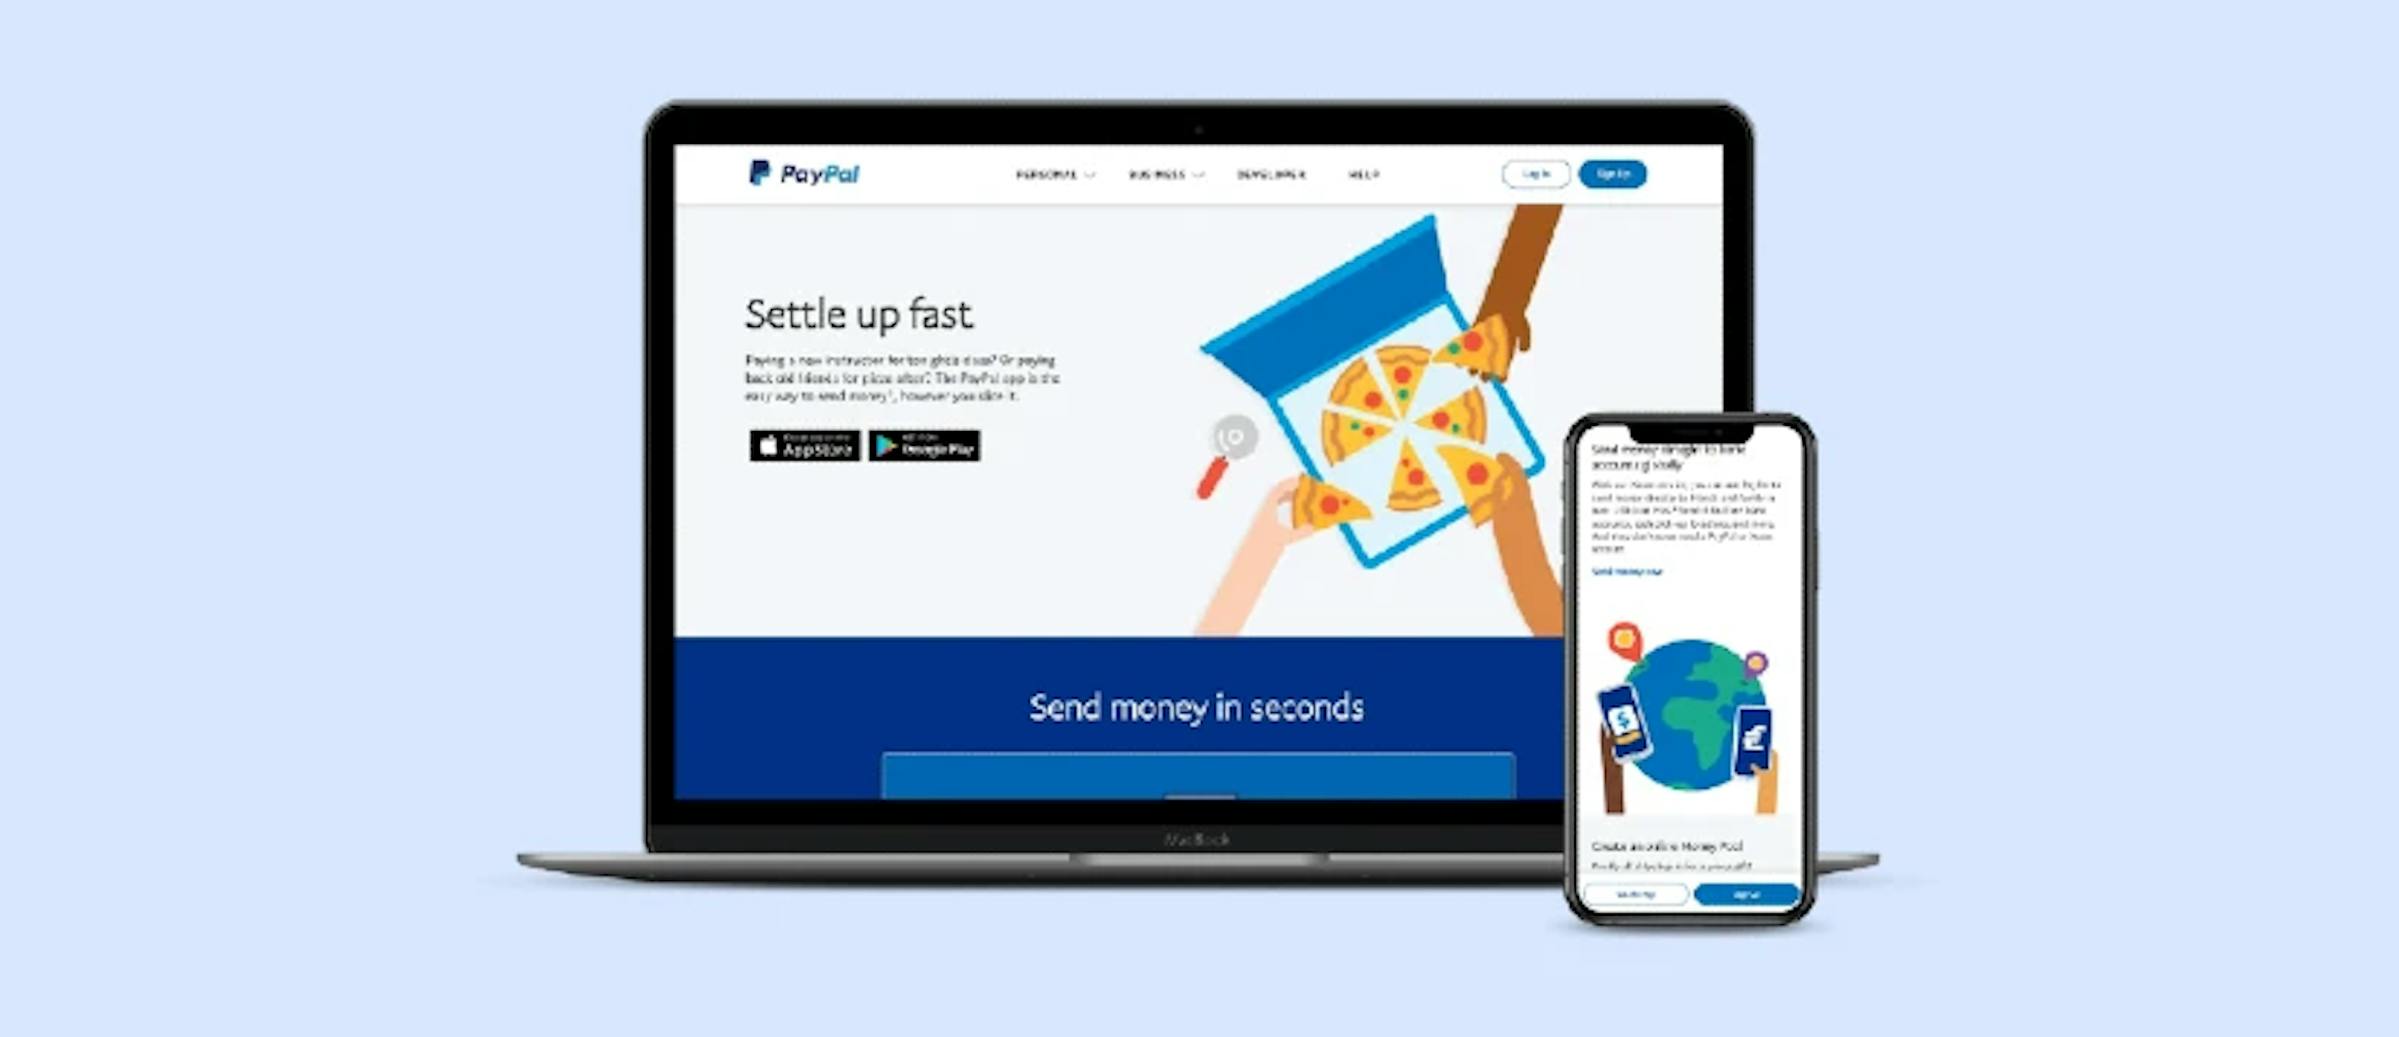 PayPal Web & Mobile web pages Pagina